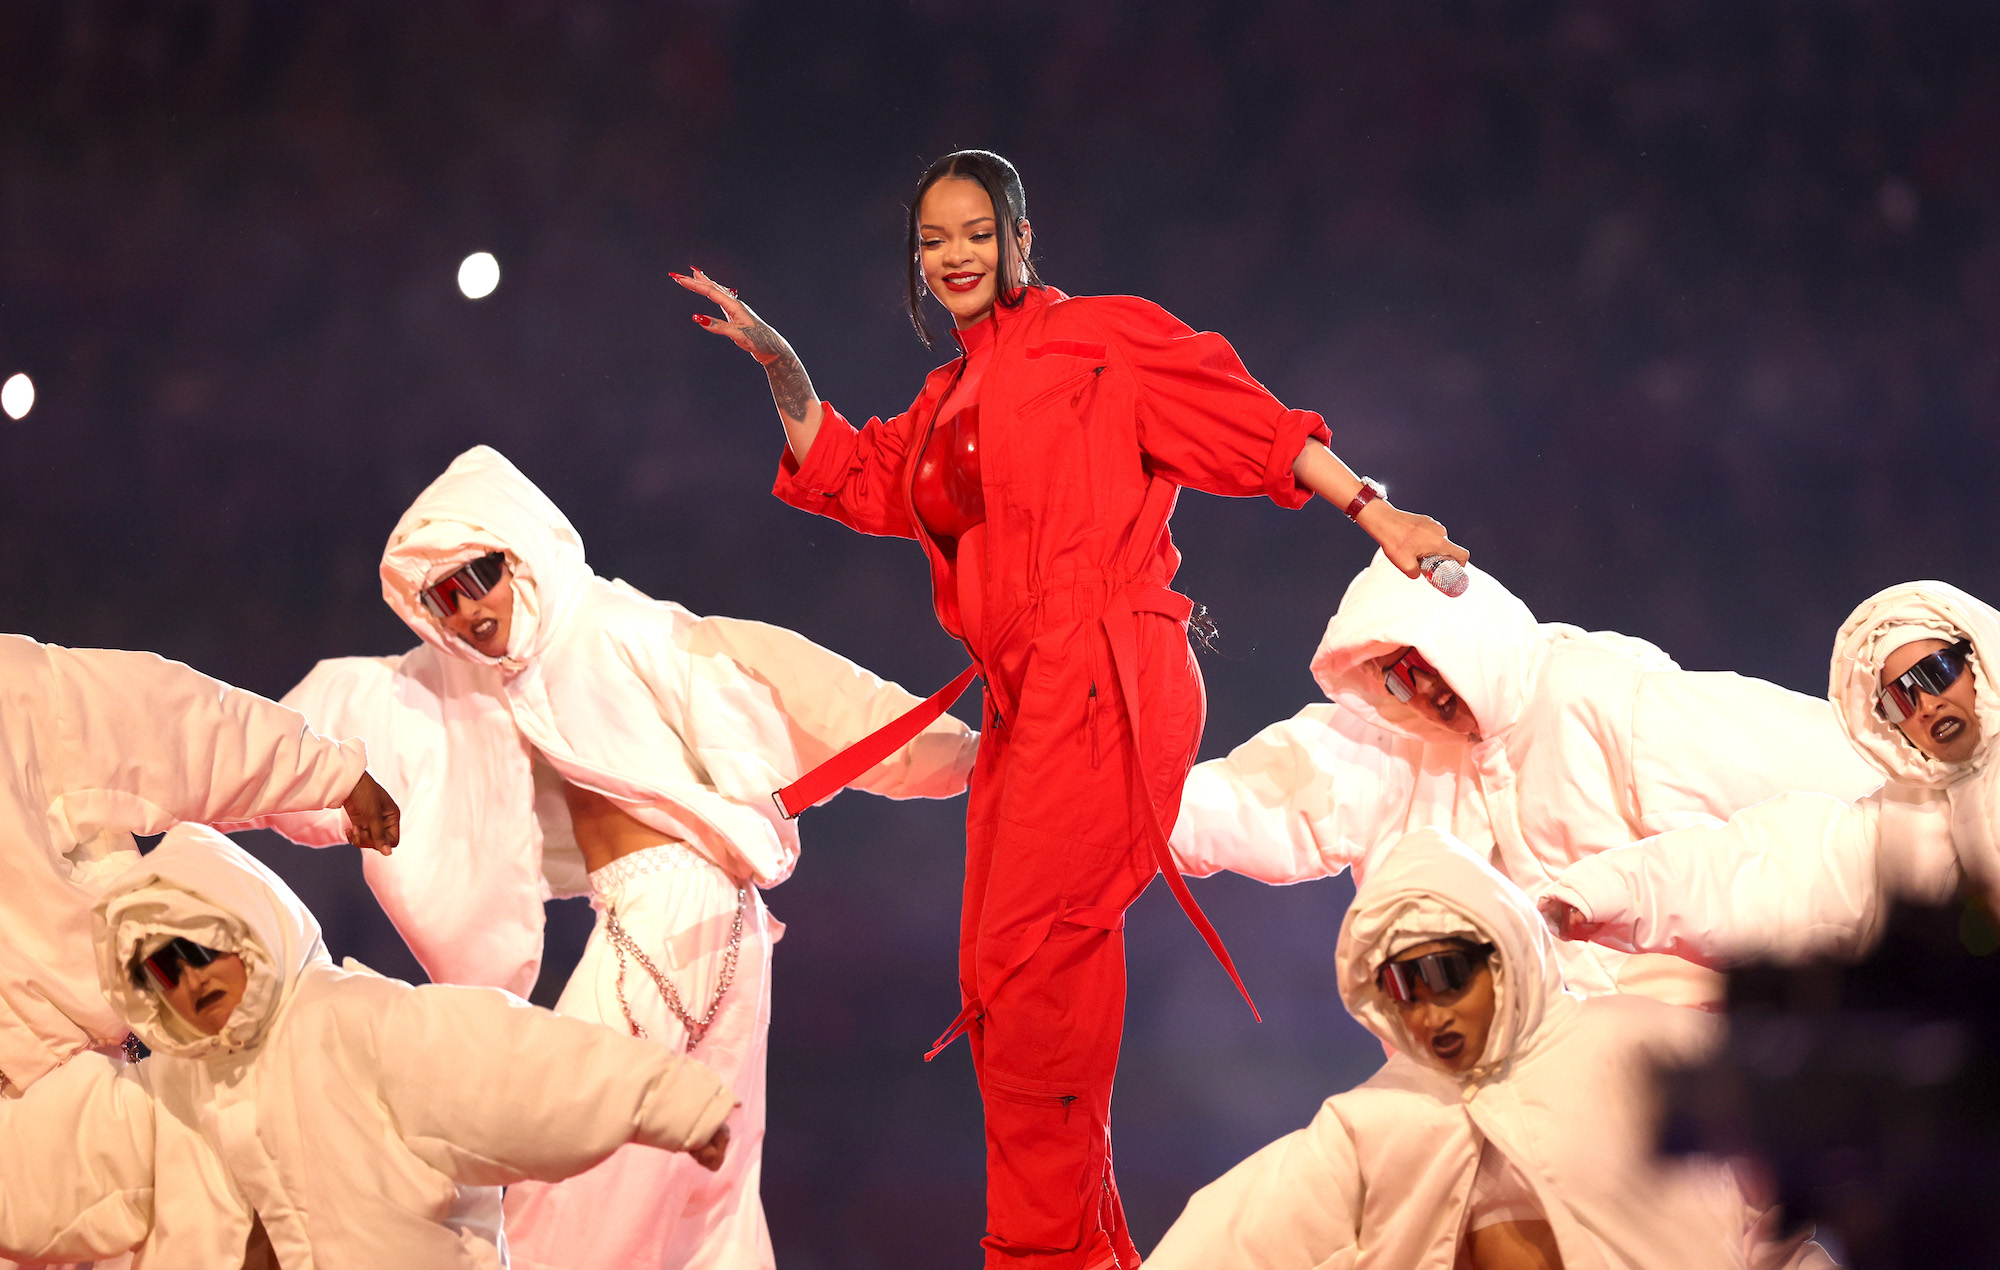 Rihanna on agreeing to perform at the Super Bowl: “It’s powerful to break those doors”